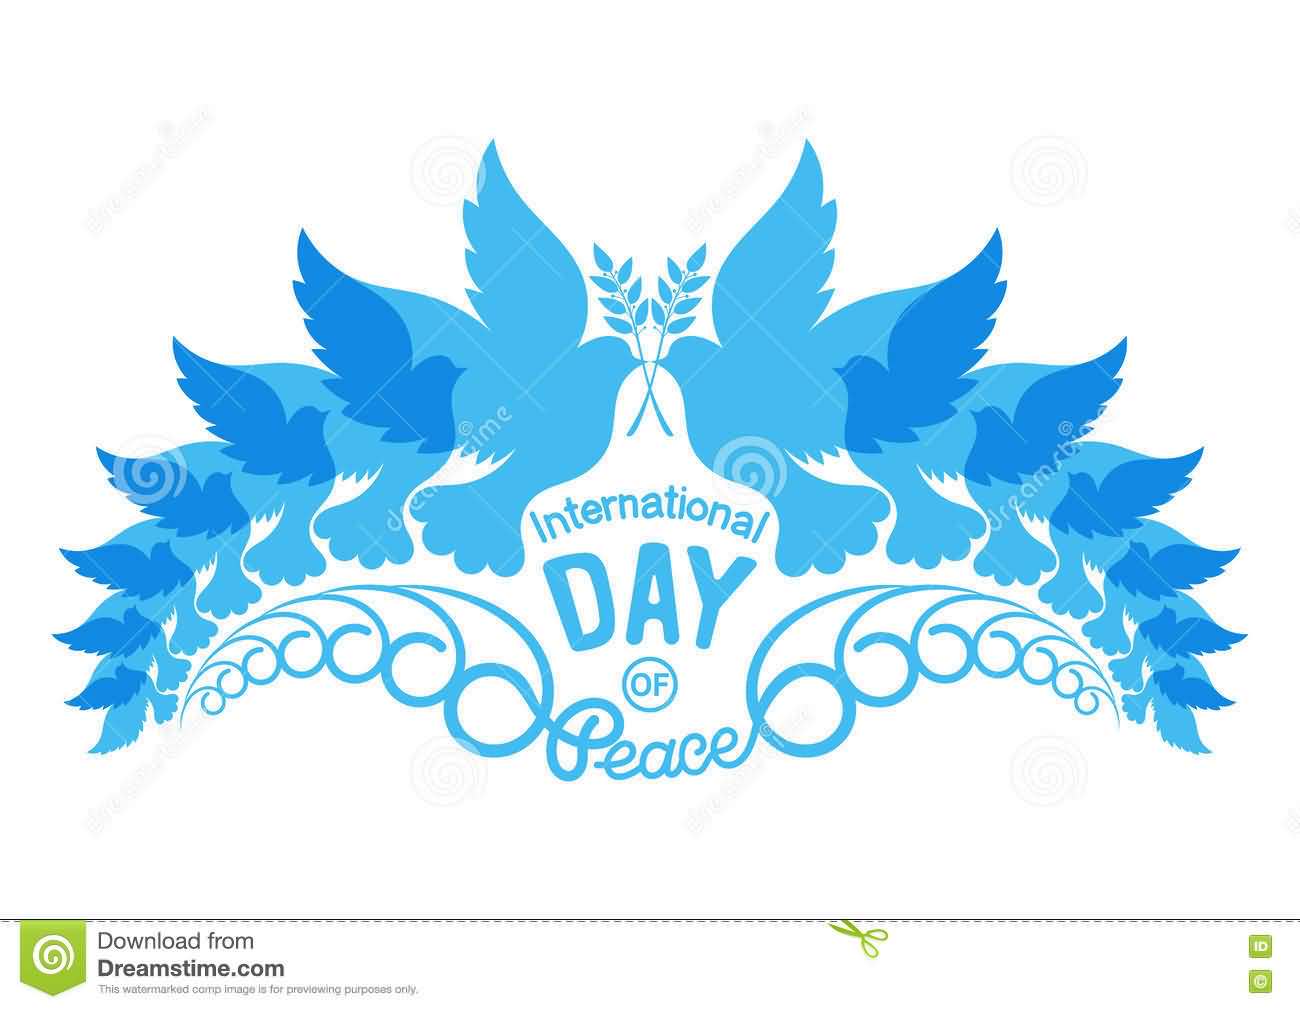 International Day Of Peace Doves With Olive Branch Illustration